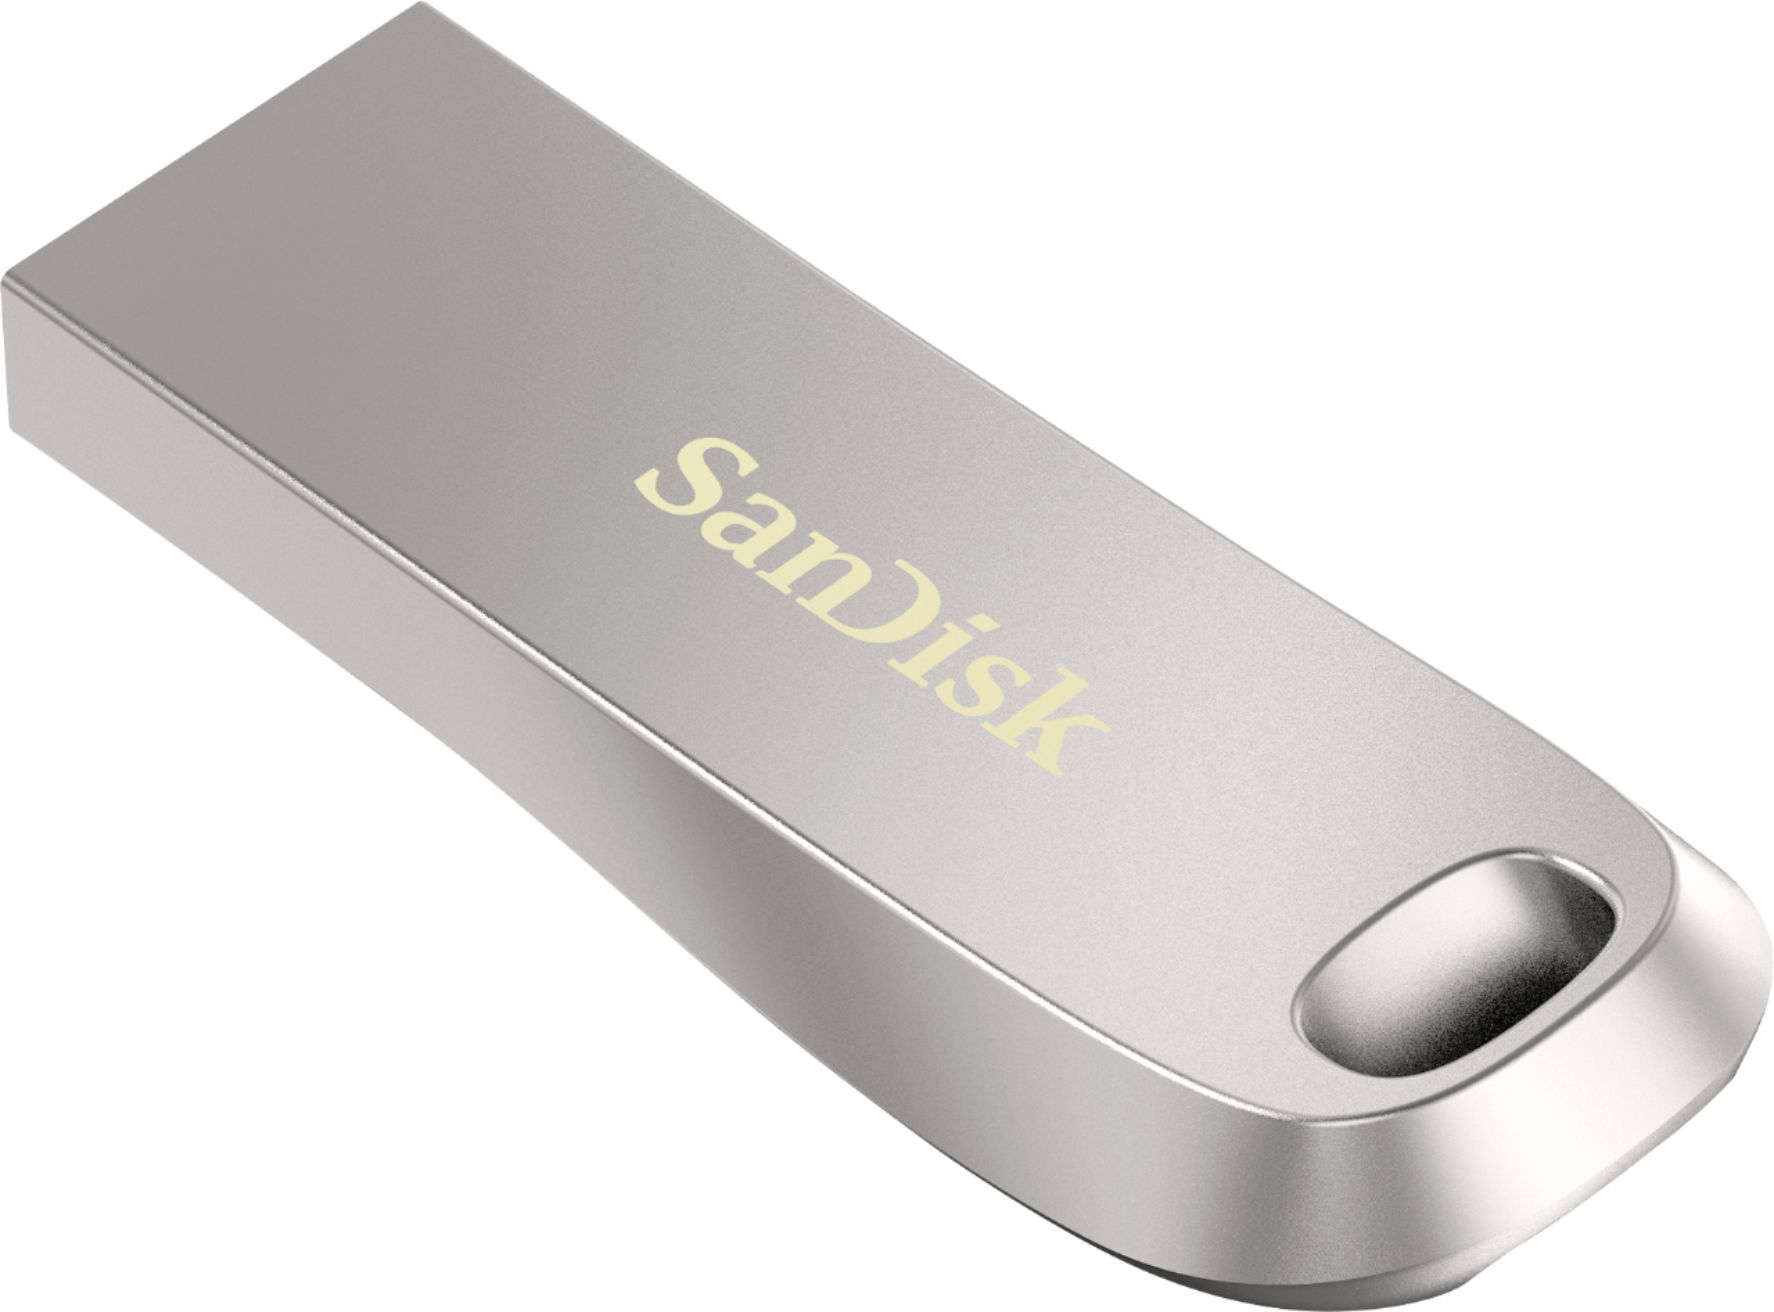 Ultra Luxe 256GB USB 3.1 Flash SDCZ74-256G-A46 - Best Buy